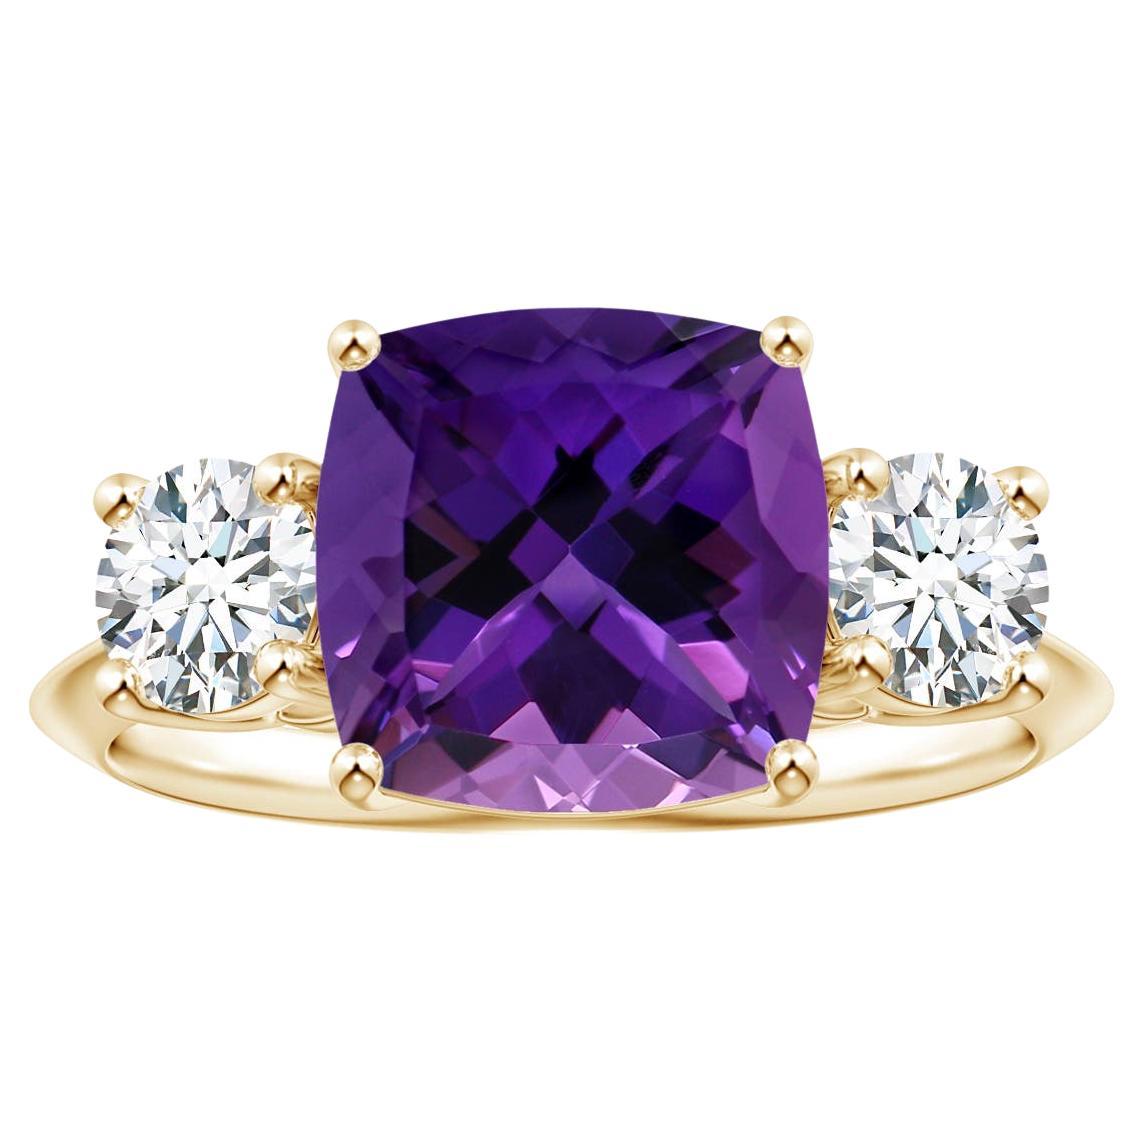 For Sale:  ANGARA 3-Stone GIA Certified Cushion Amethyst Ring in Yellow Gold with Diamonds